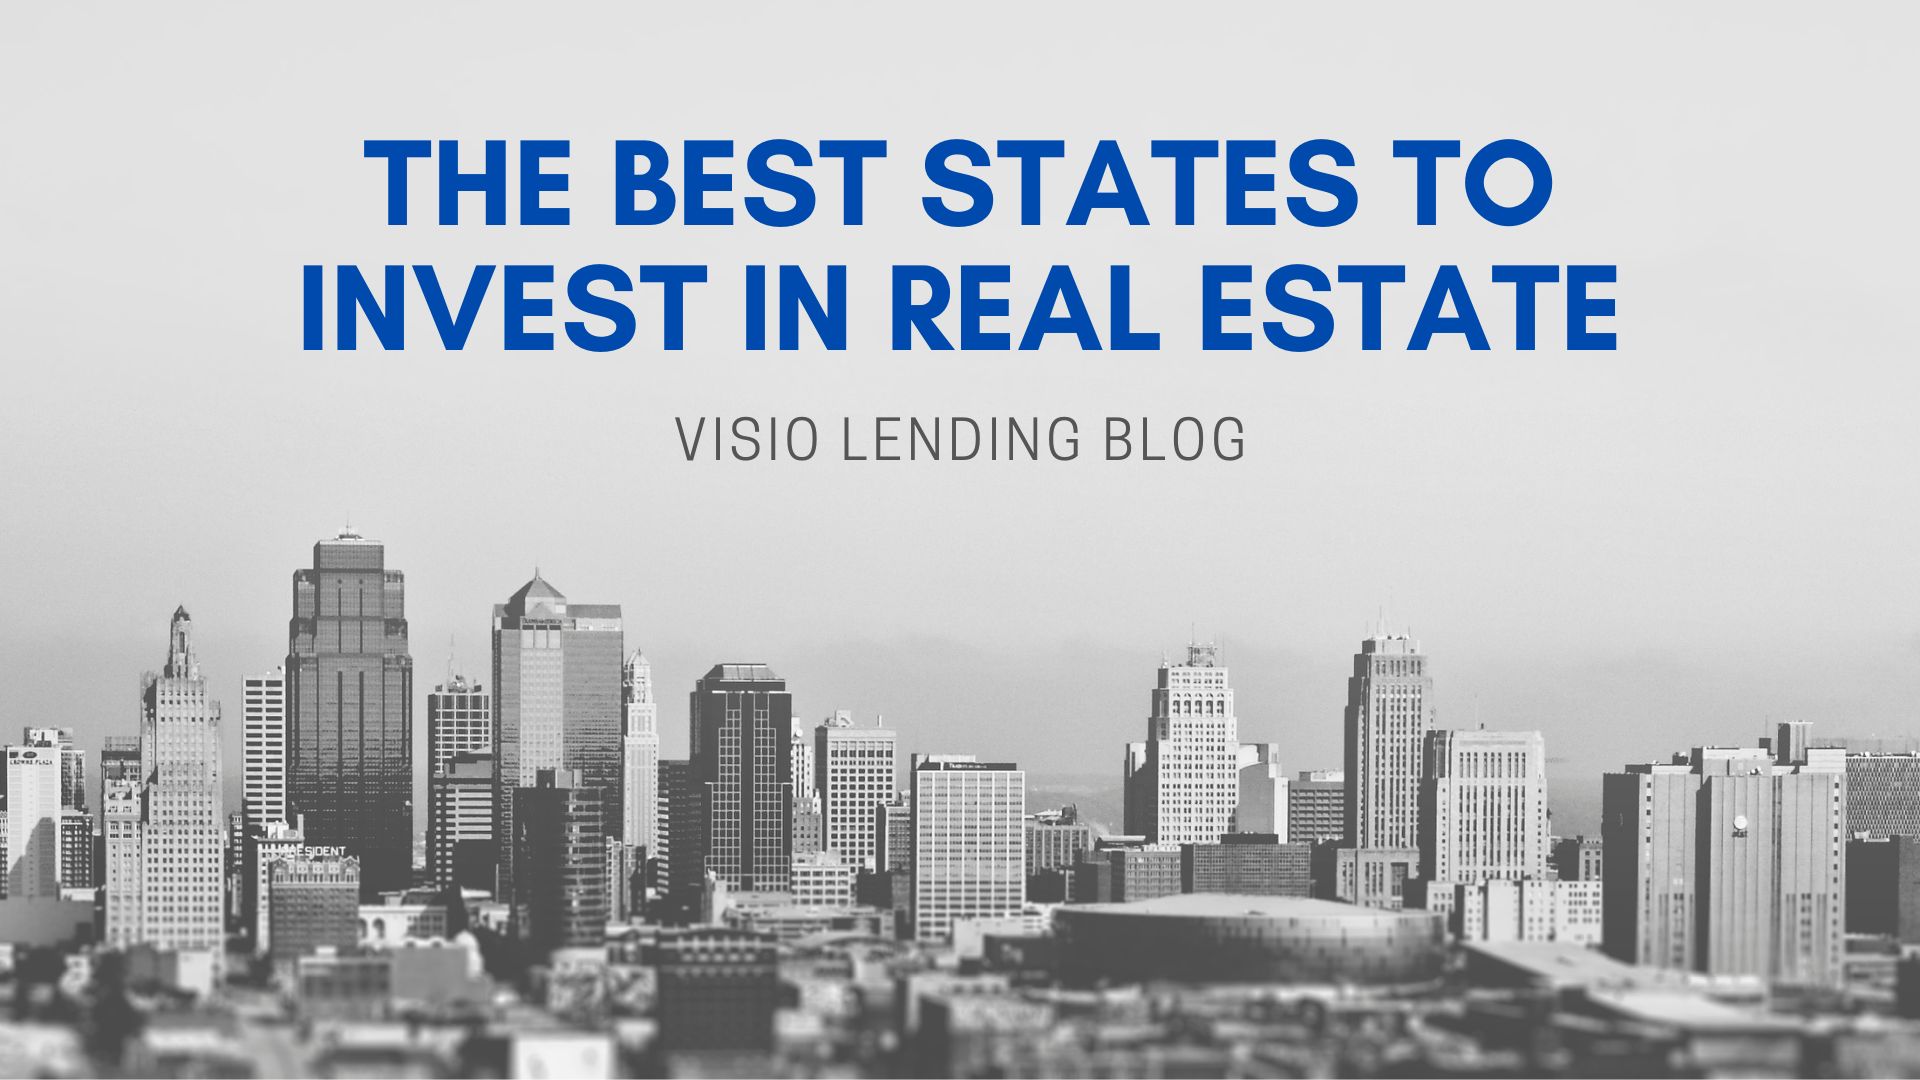 15 Best States to Invest in Real Estate This Year